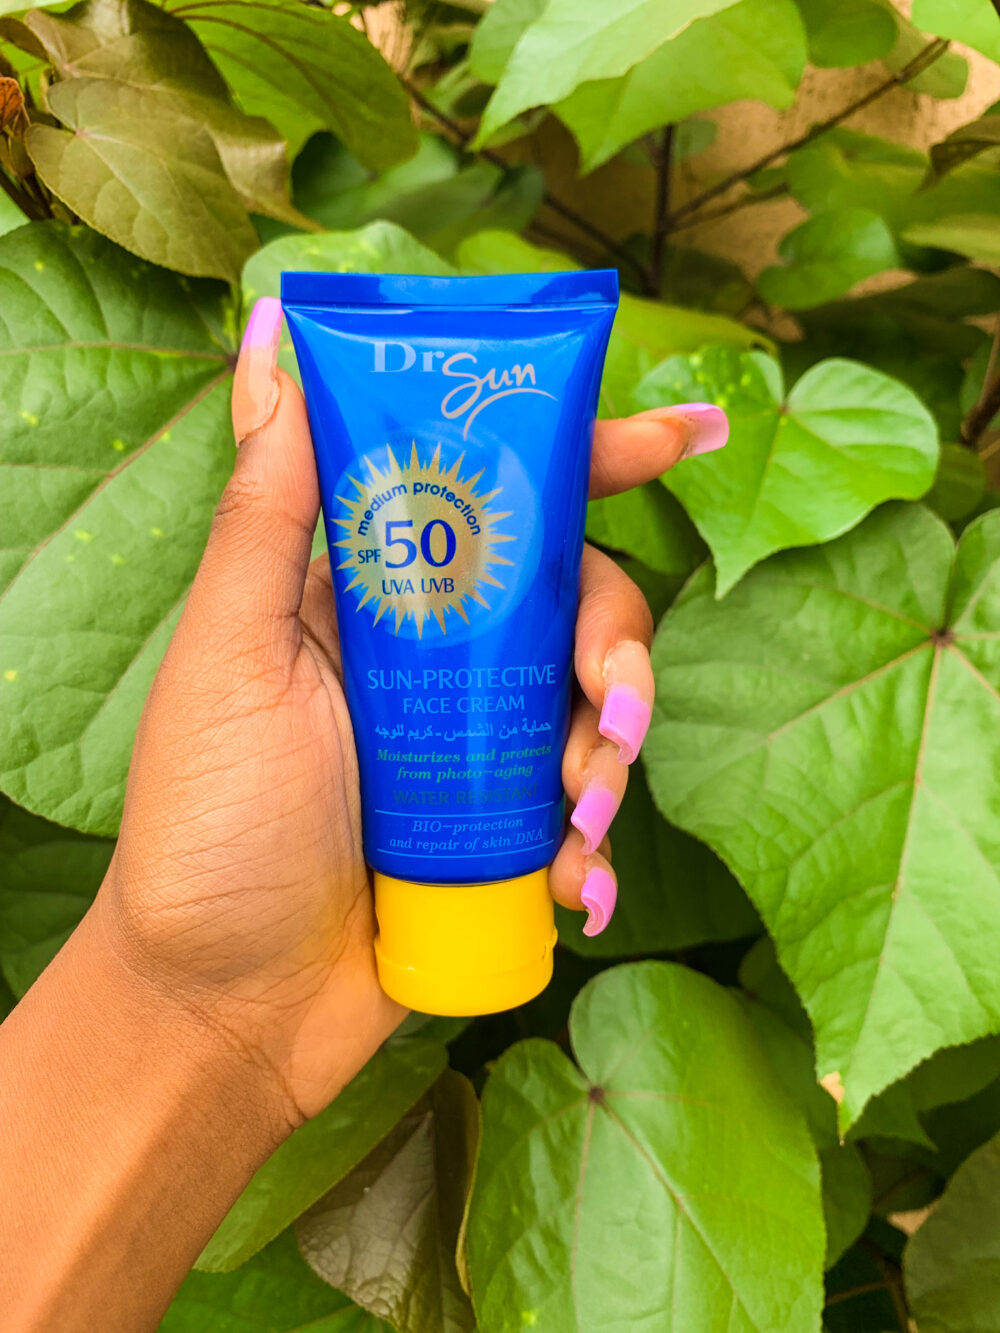 Dr Sun affordable sunscreen review